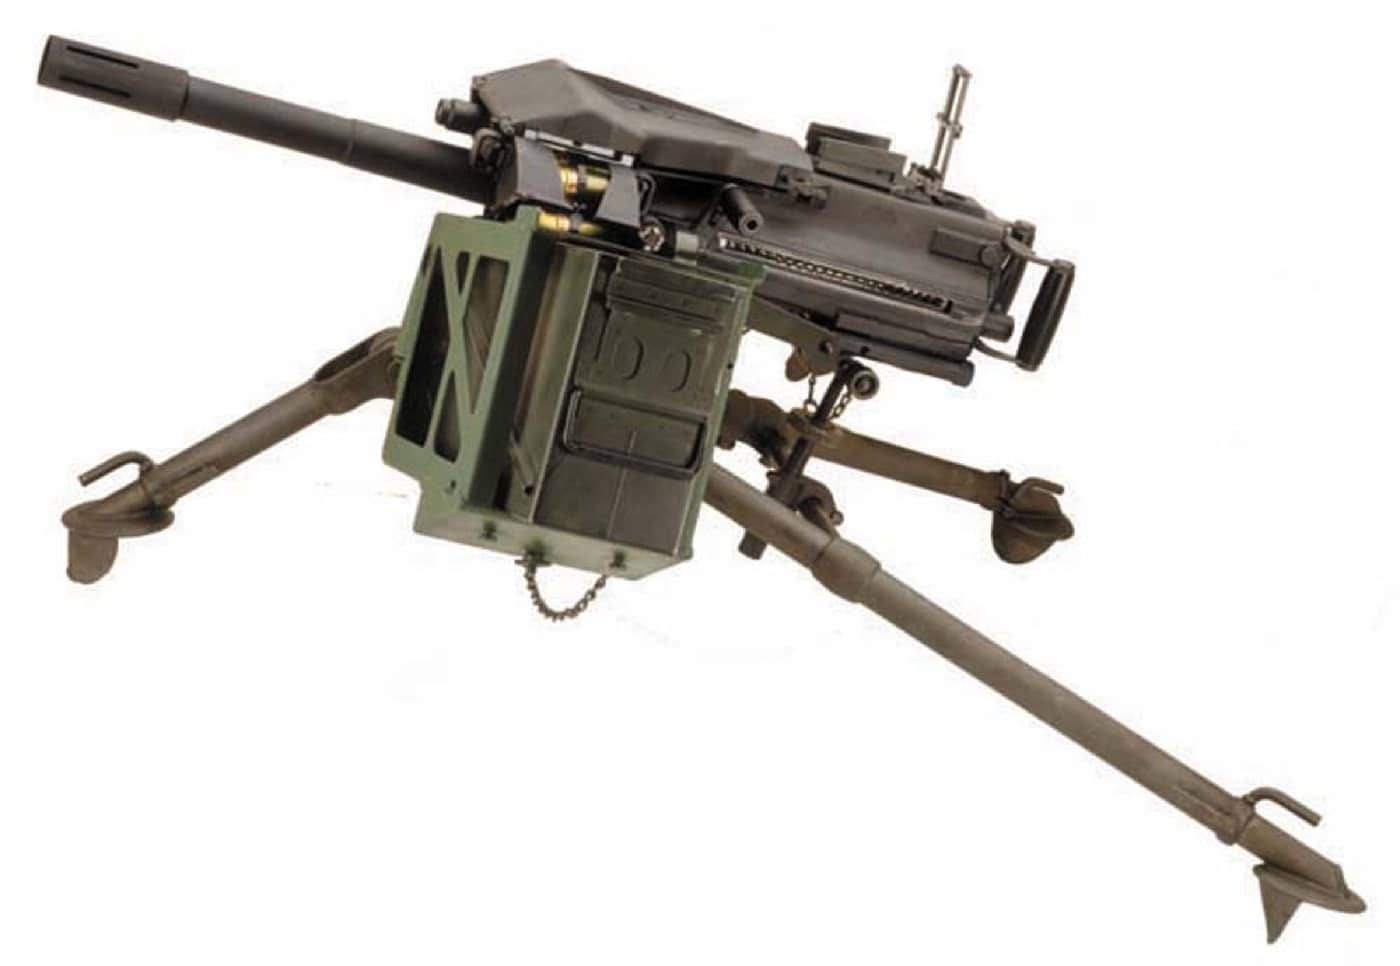 Shown is the Mk19 on a white background. The weapon system delivers high-volume fire into an engagement and allows for indirect fires from hidden positions. A Marine Expeditionary Force may not have heavy artillery available, so this provides a great deal of flexibility. Marines can use it to fire on suspected enemy positions in a quicker, more accurate way than traditional mortars can.